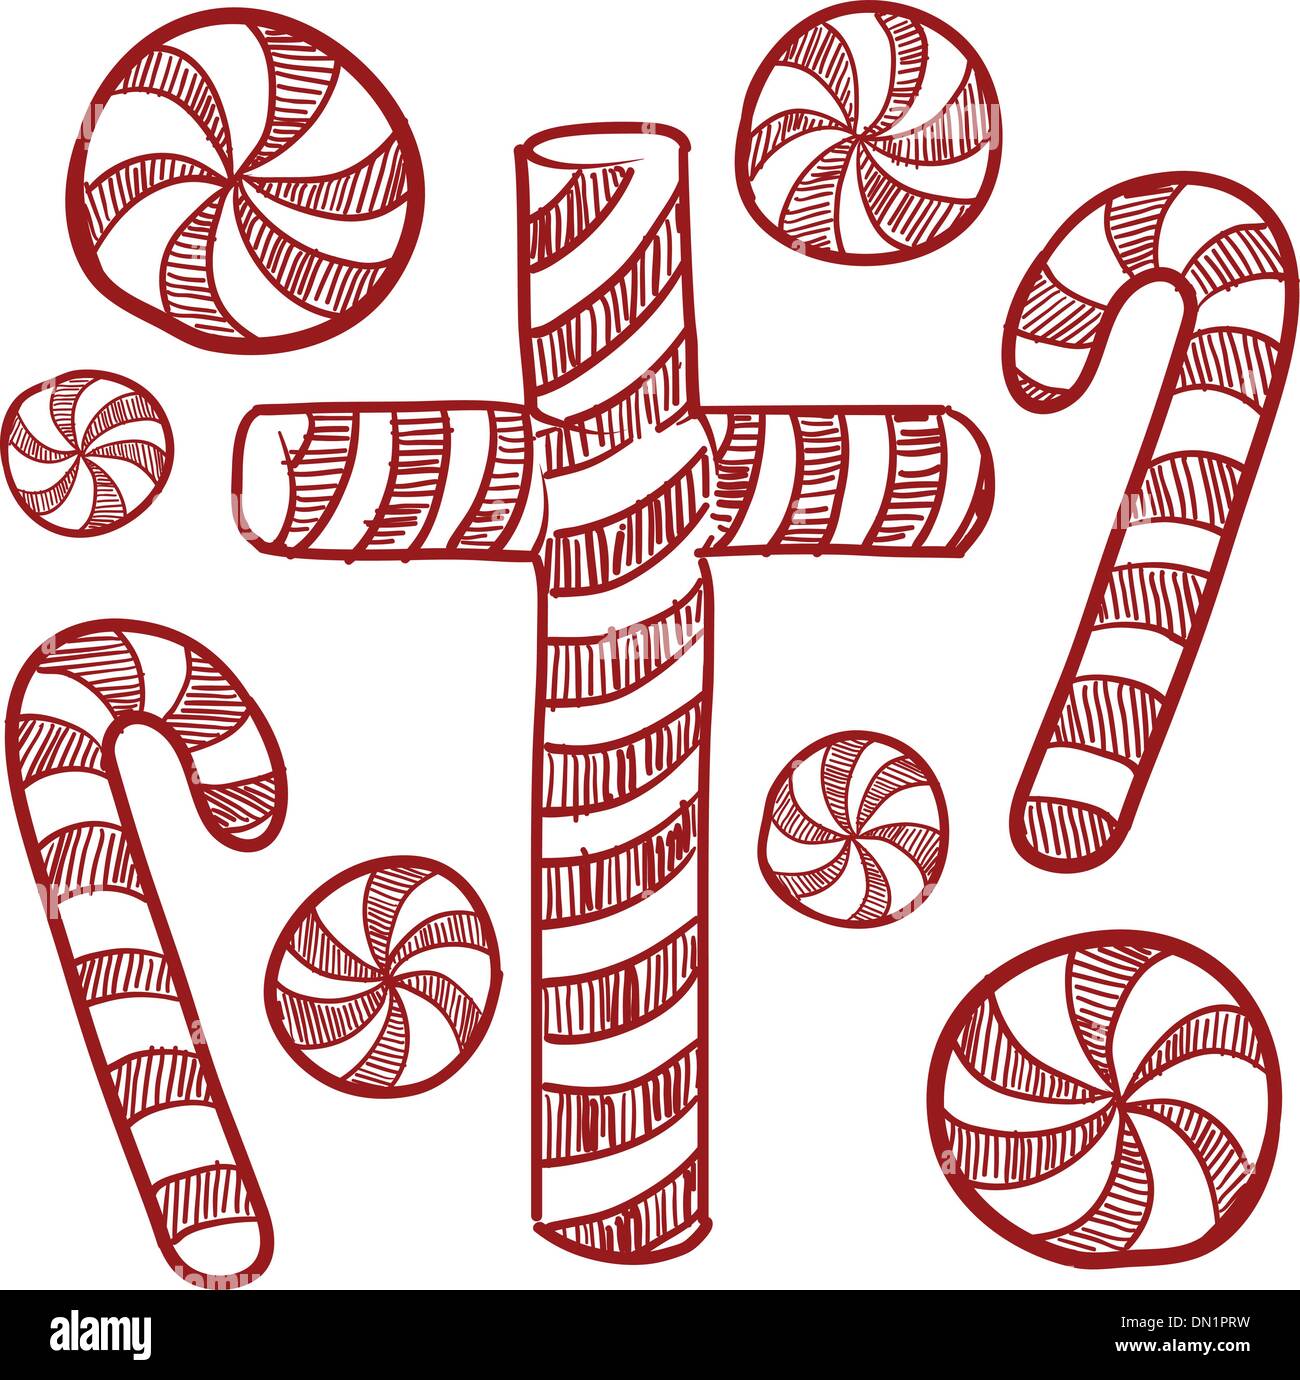 Candy Cane Template Therapy Worksheets Candy Cane Template - Candy Cane  Line Drawing | Candy cane template, Candy cane coloring page, Candy cane  crafts